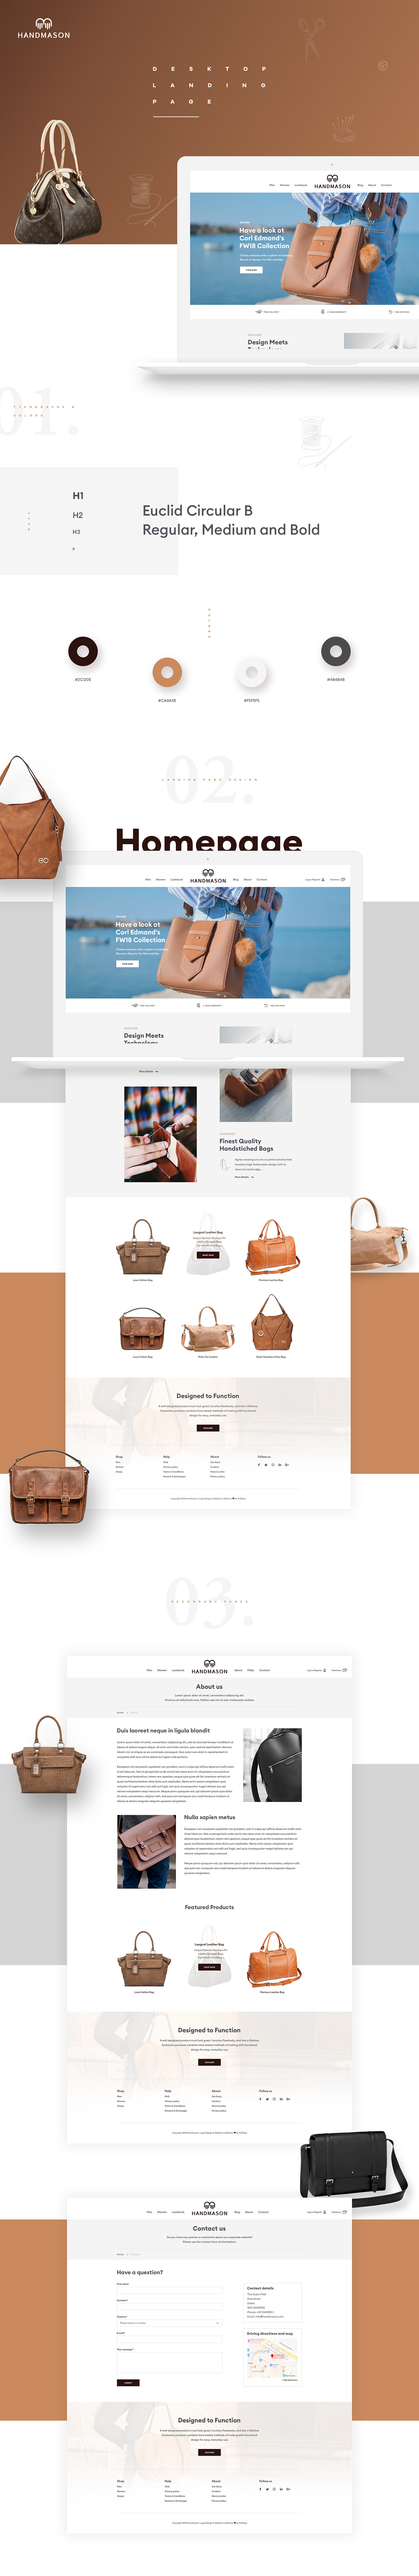 leather bags homepage design